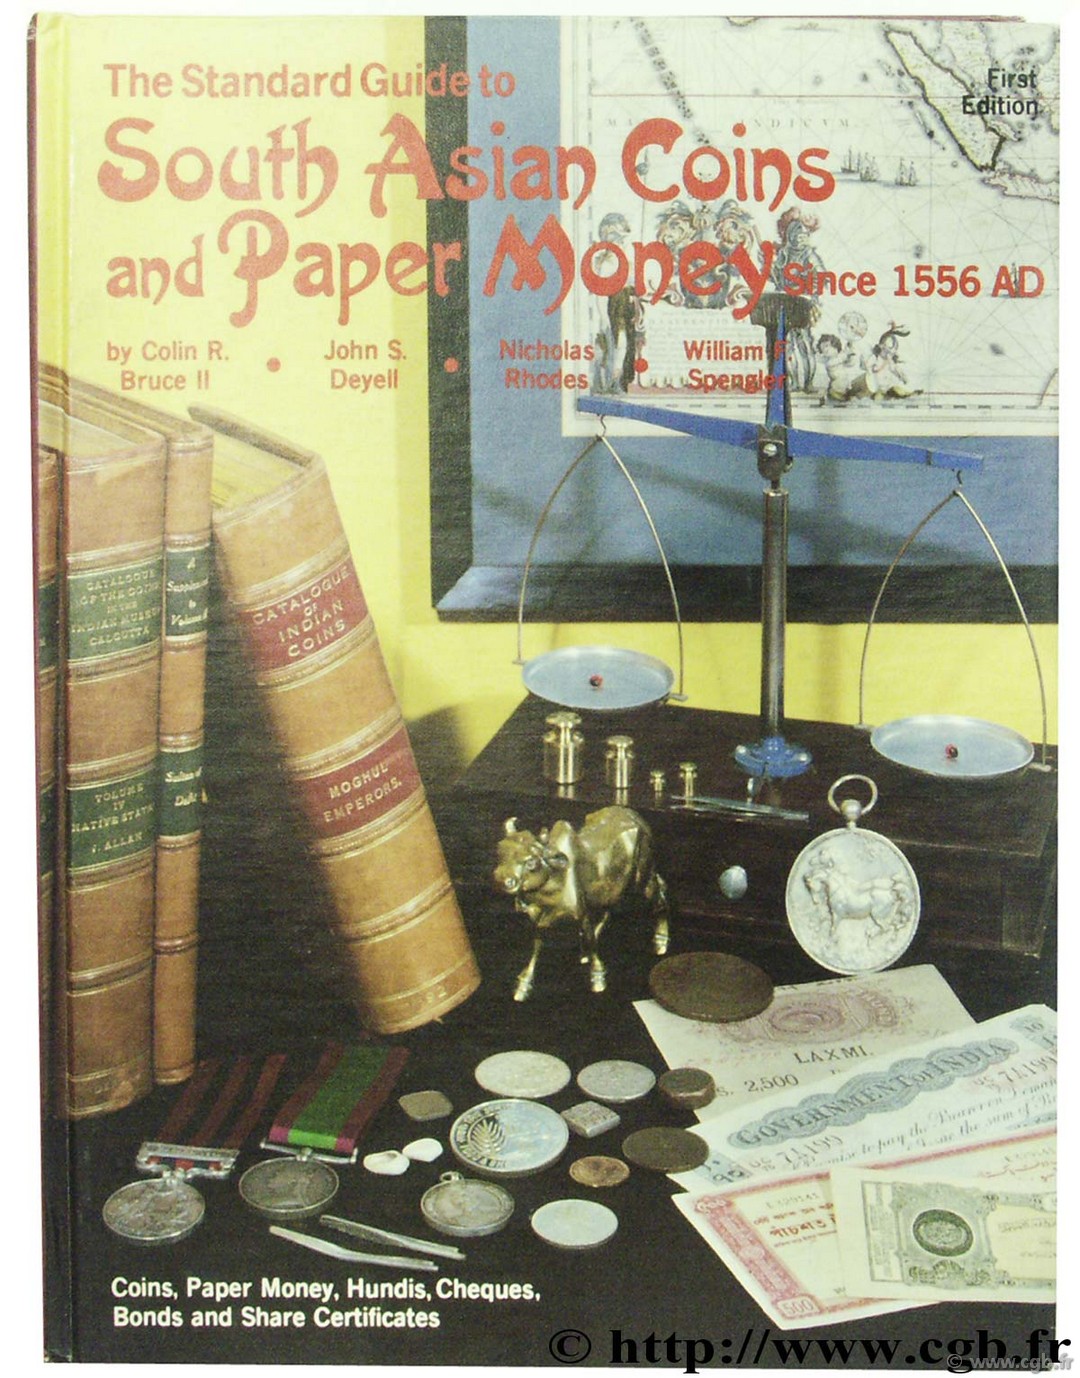 The Standard Guide to South Asian Coins and Paper Money since 1556 AD BRUCE II C.-R., DEYELL J.-S., RHODES N., SPENGLER W.-F.